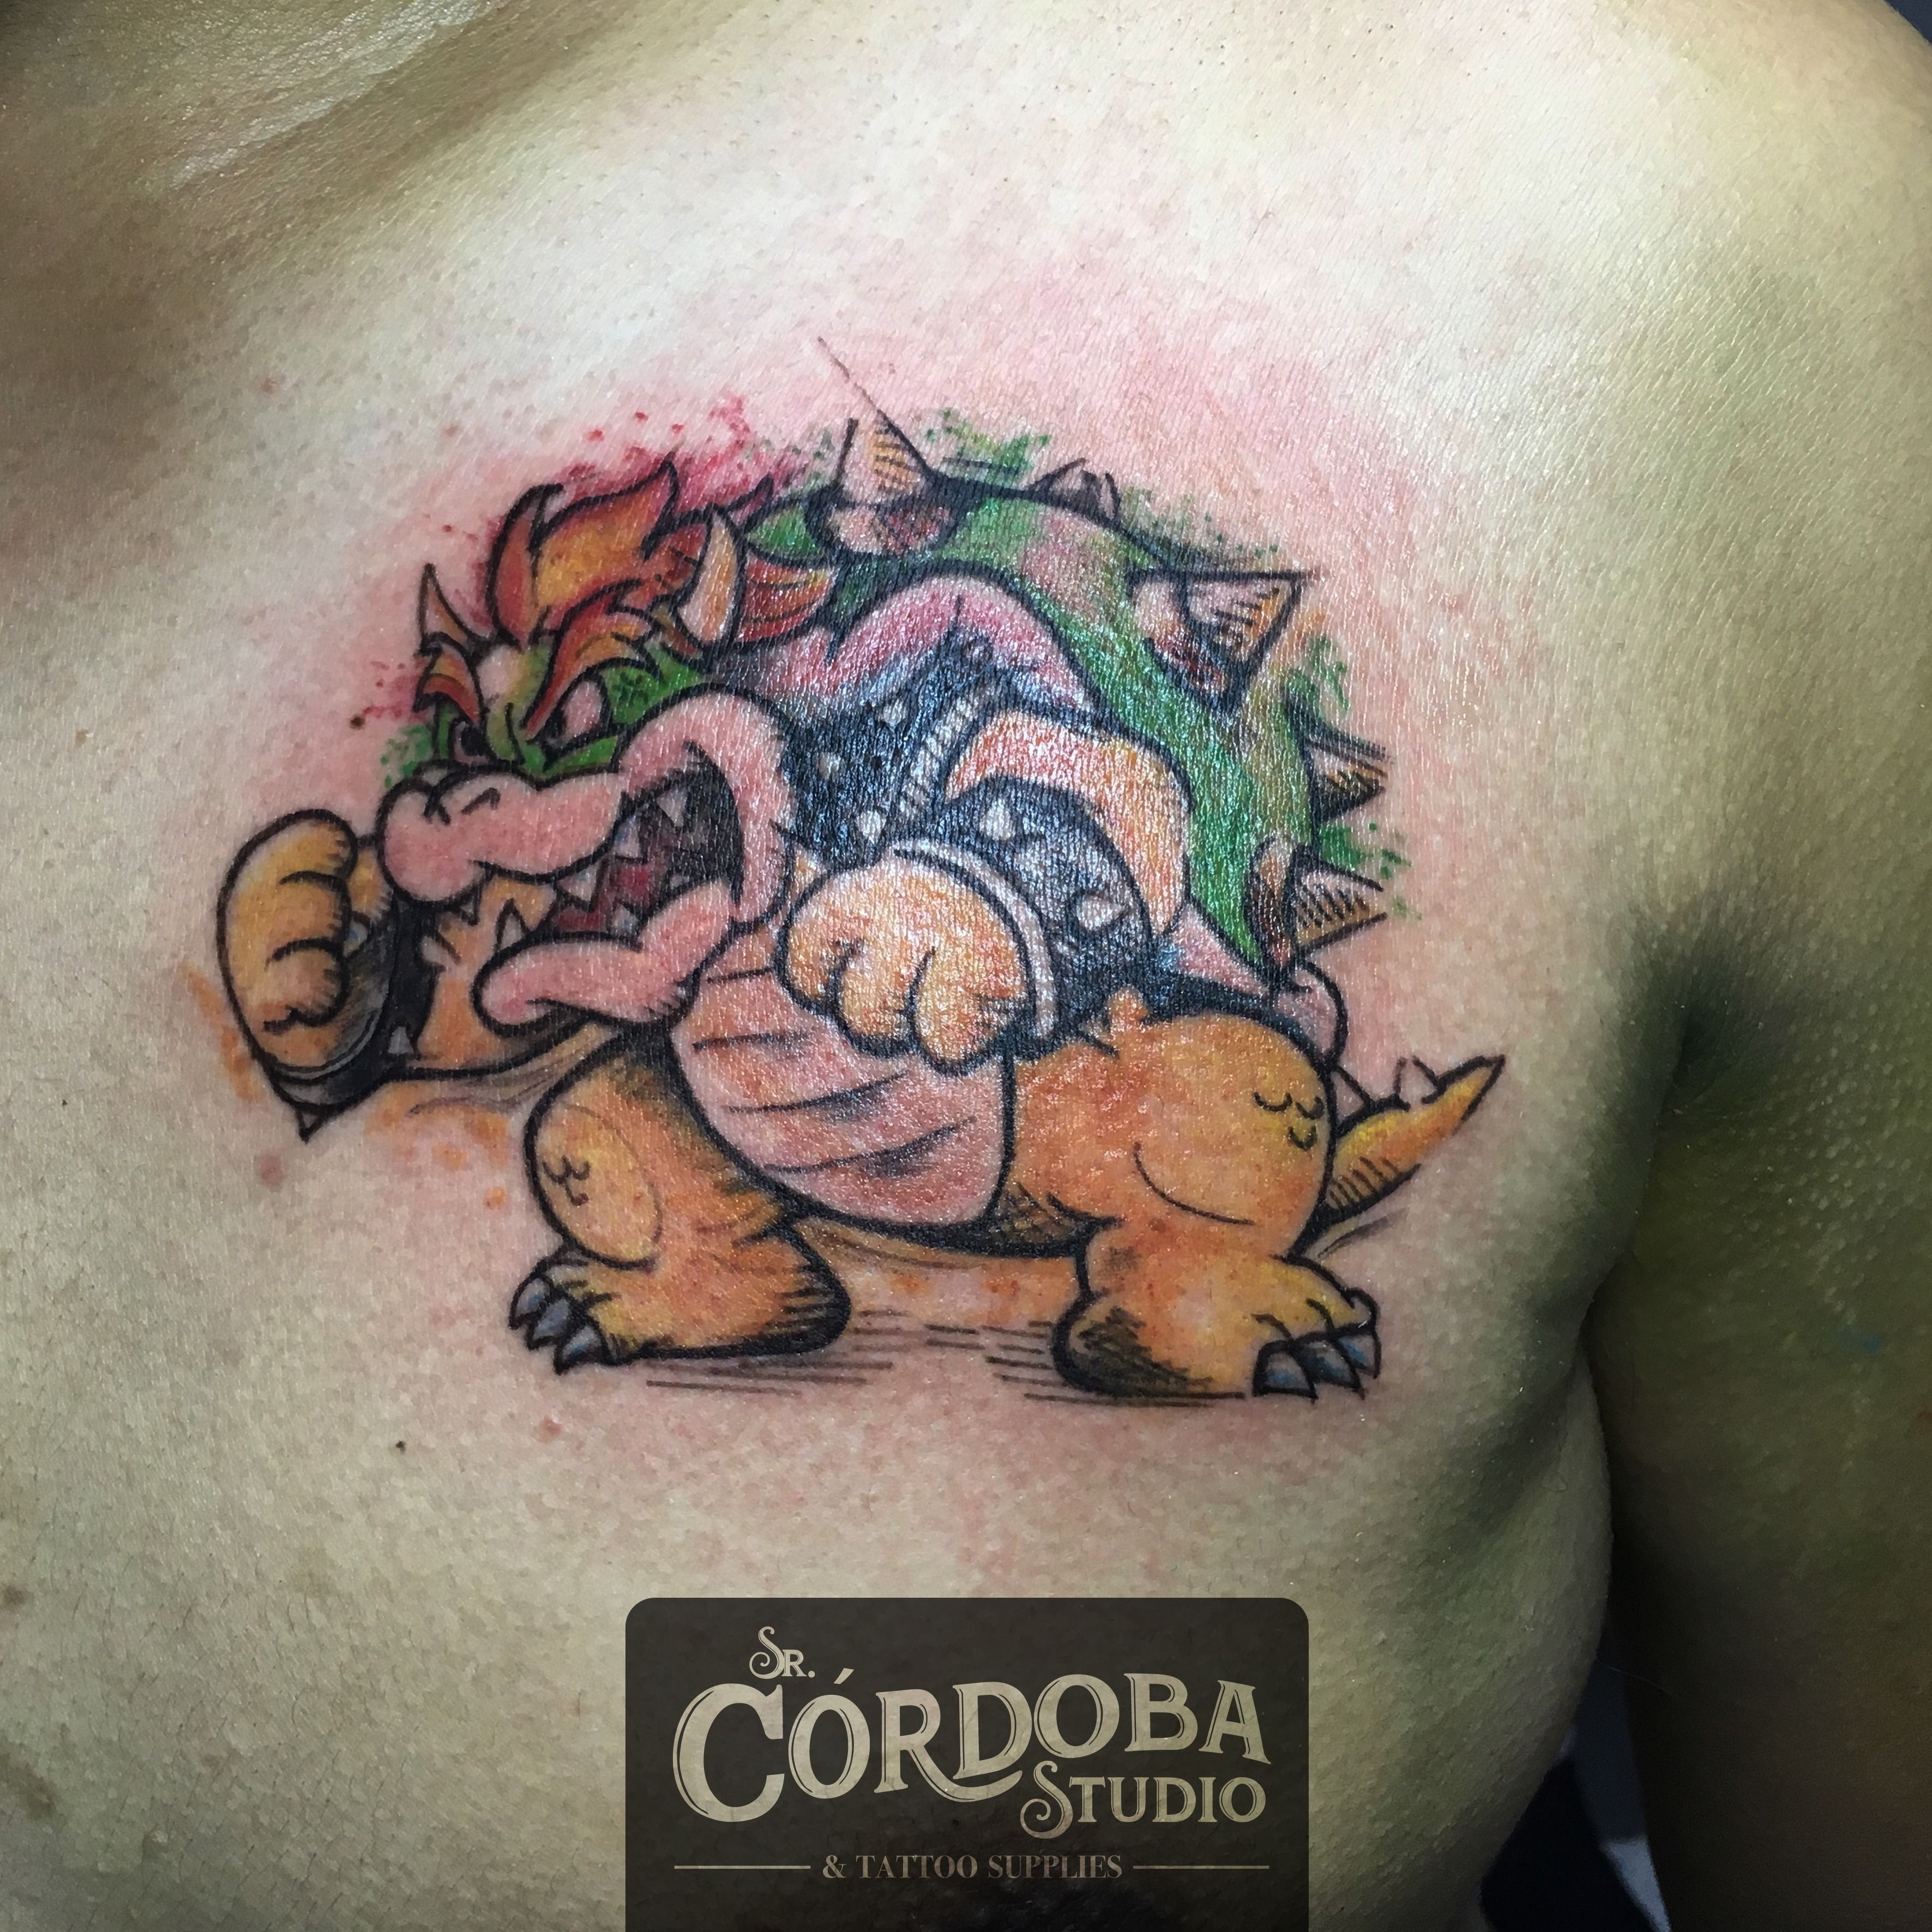 Awesome Video Game Tattoos  Tattoo Ideas Artists and Models